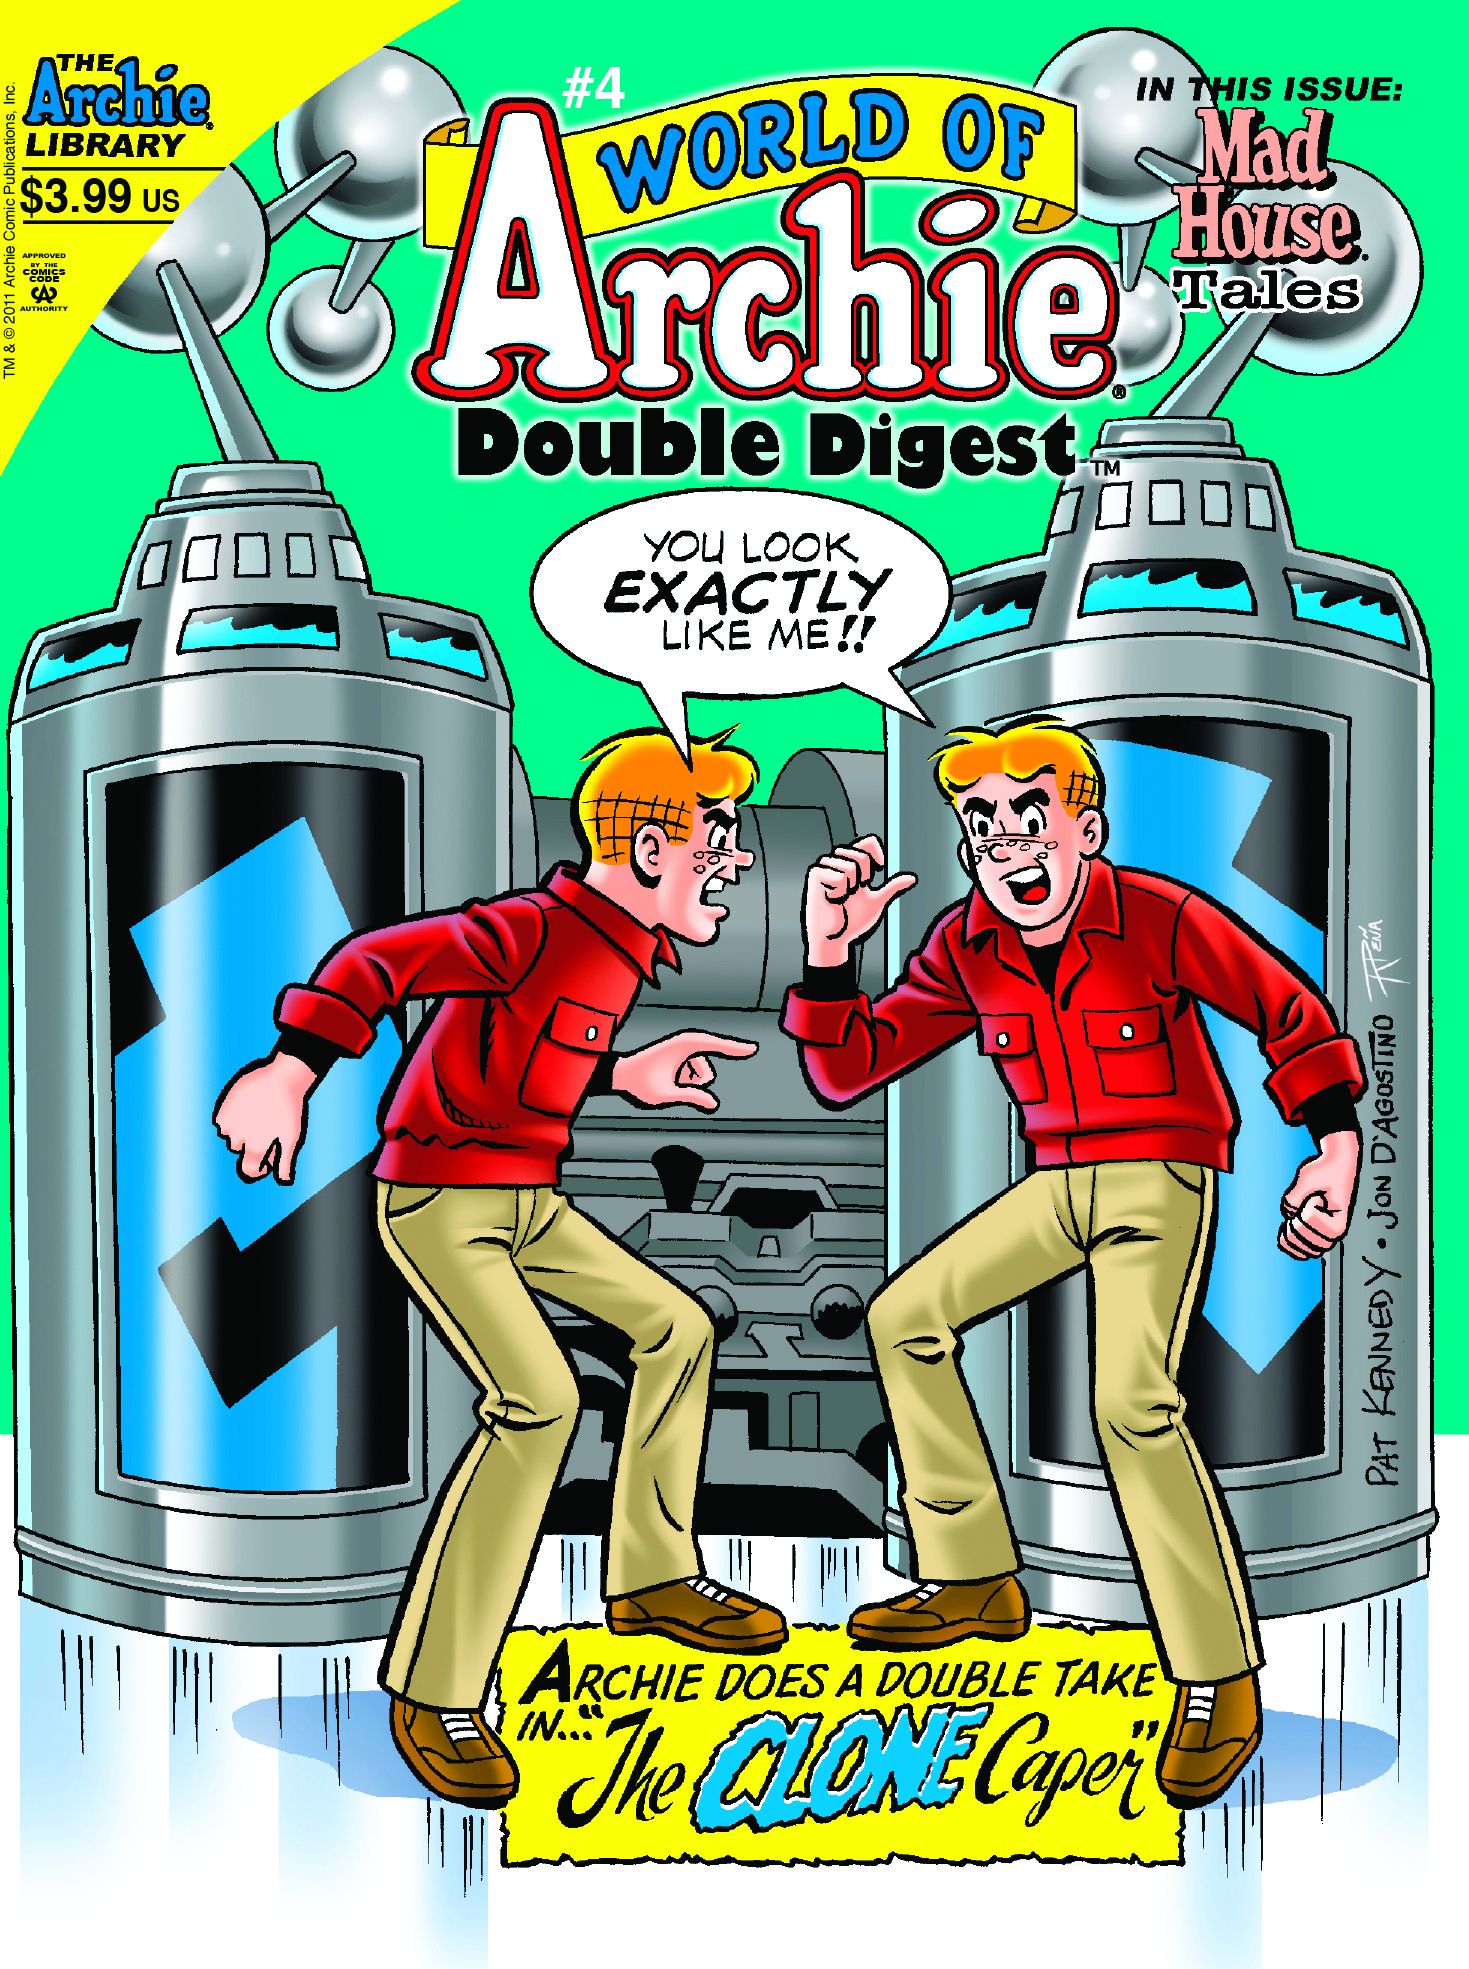 WORLD OF ARCHIE DOUBLE DIGEST #4